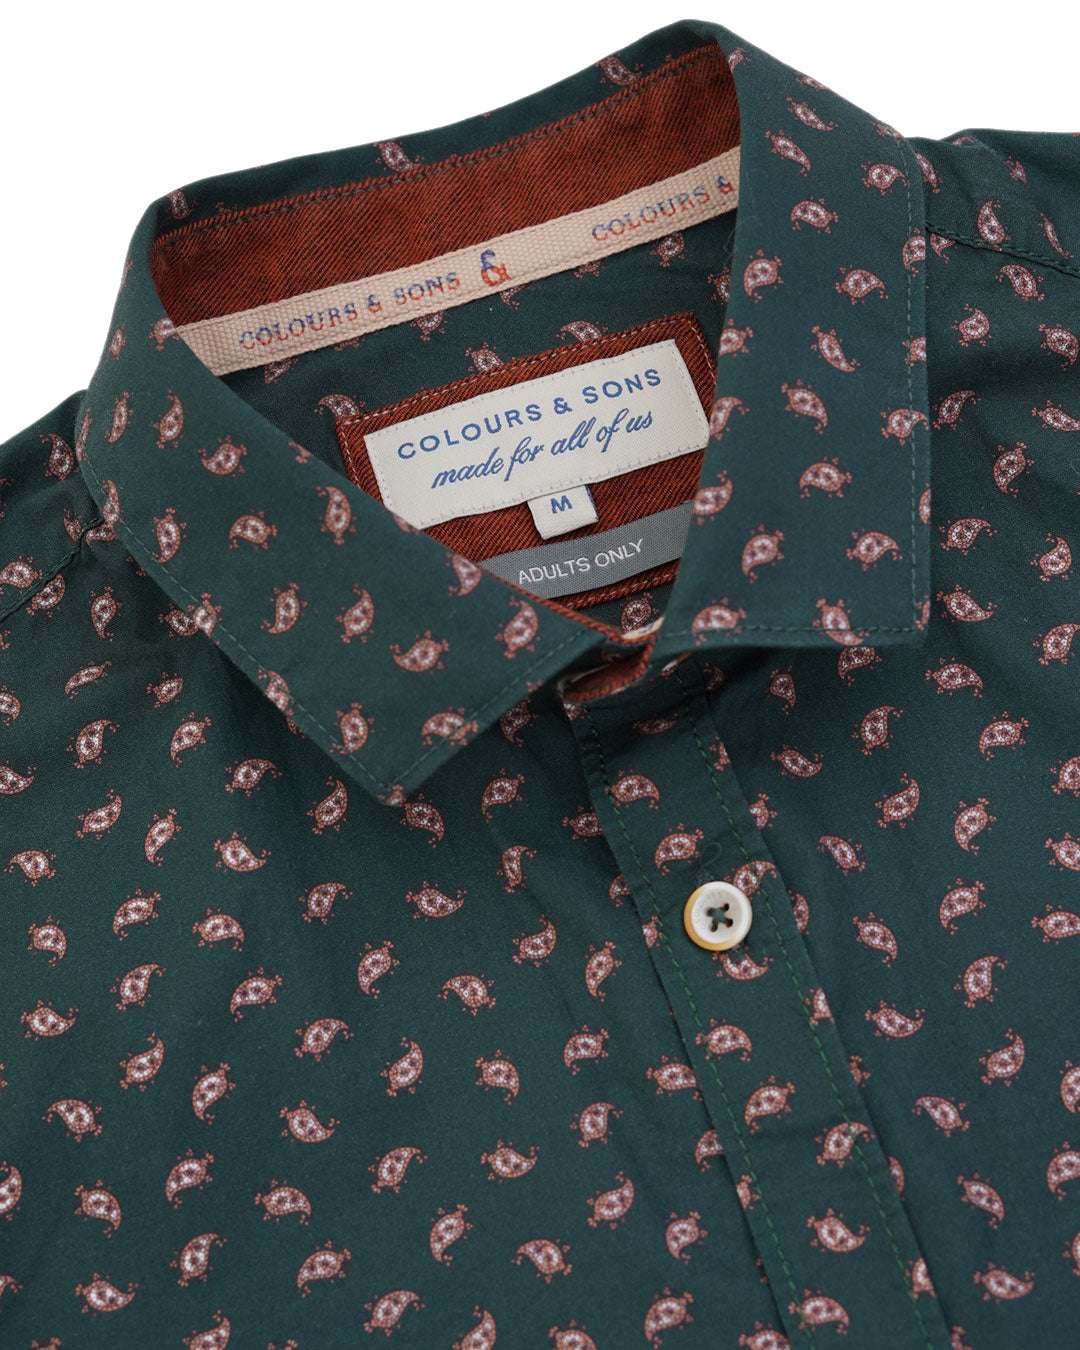 Shirt-Paisley Print in Moss Paisley Hemden Colours and Sons   